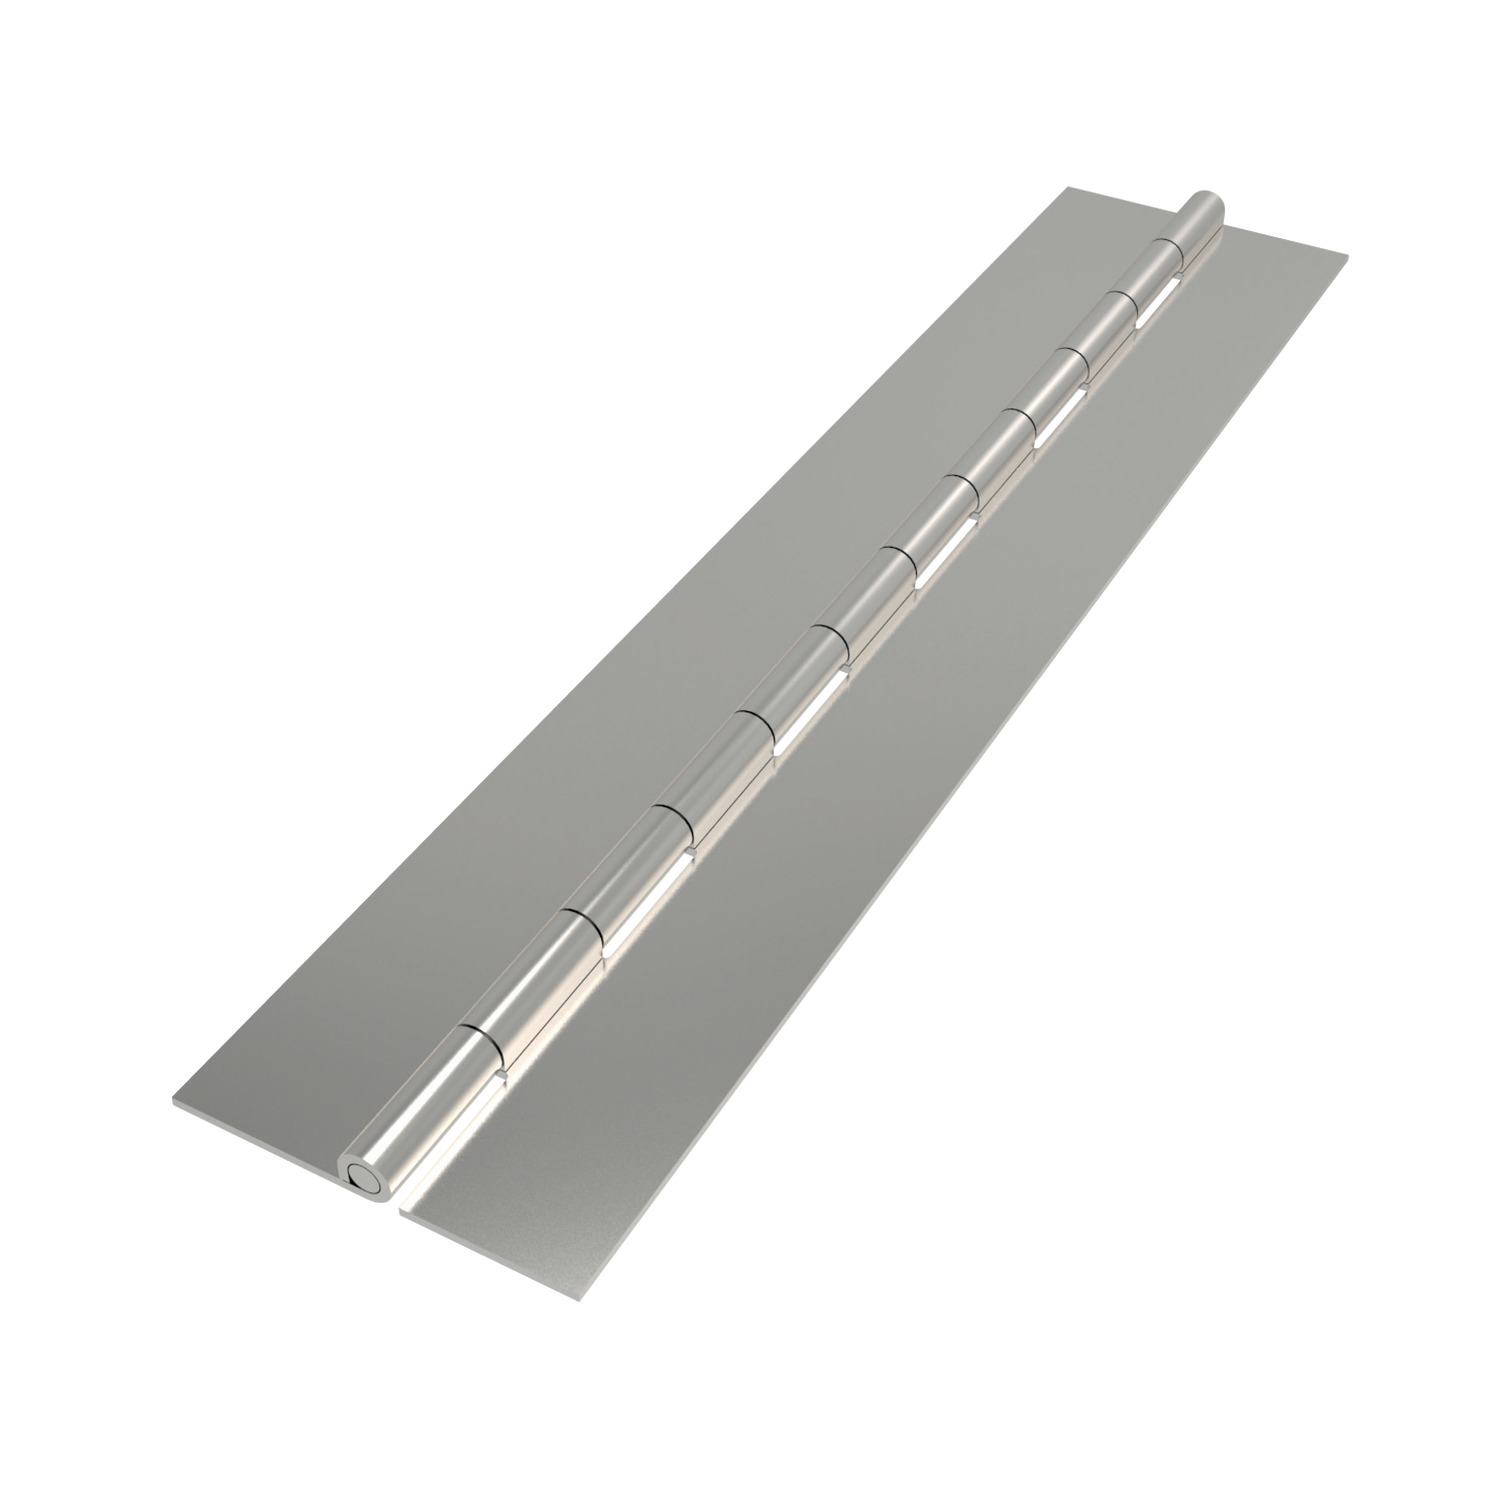 S0050.AC0202 Surface Mount - Piano Hinges Weld on - Stainless steel. 300 x 25